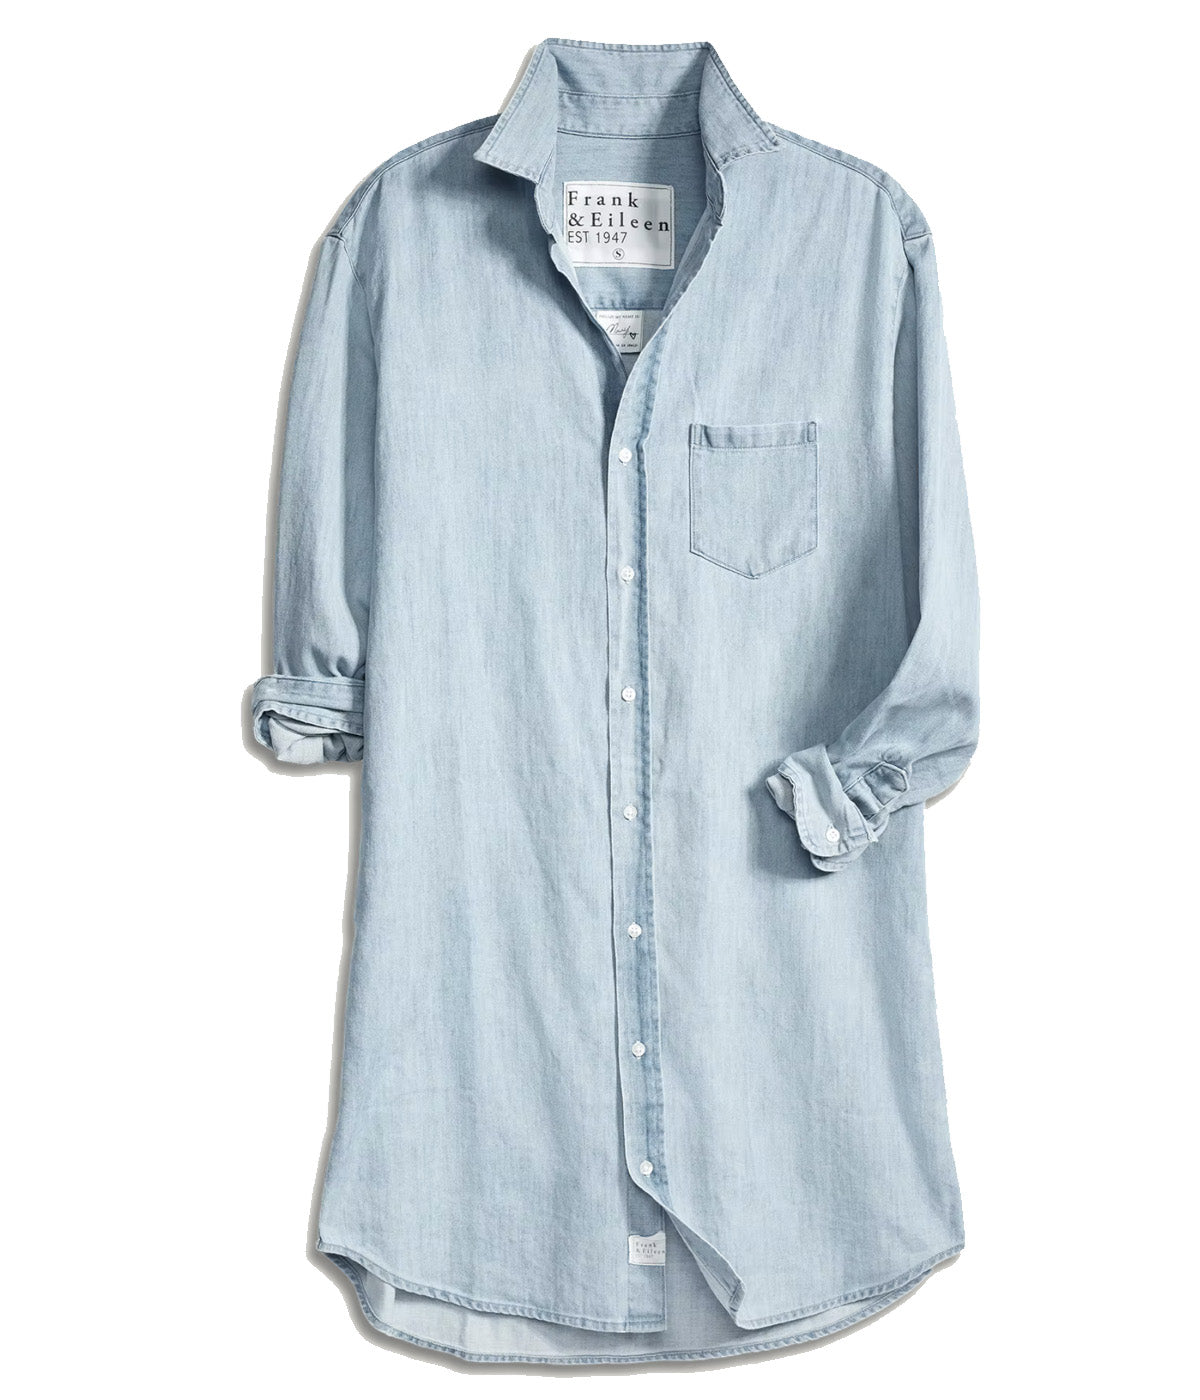 Mary Woven Denim Button Up in Classic Blue Wash